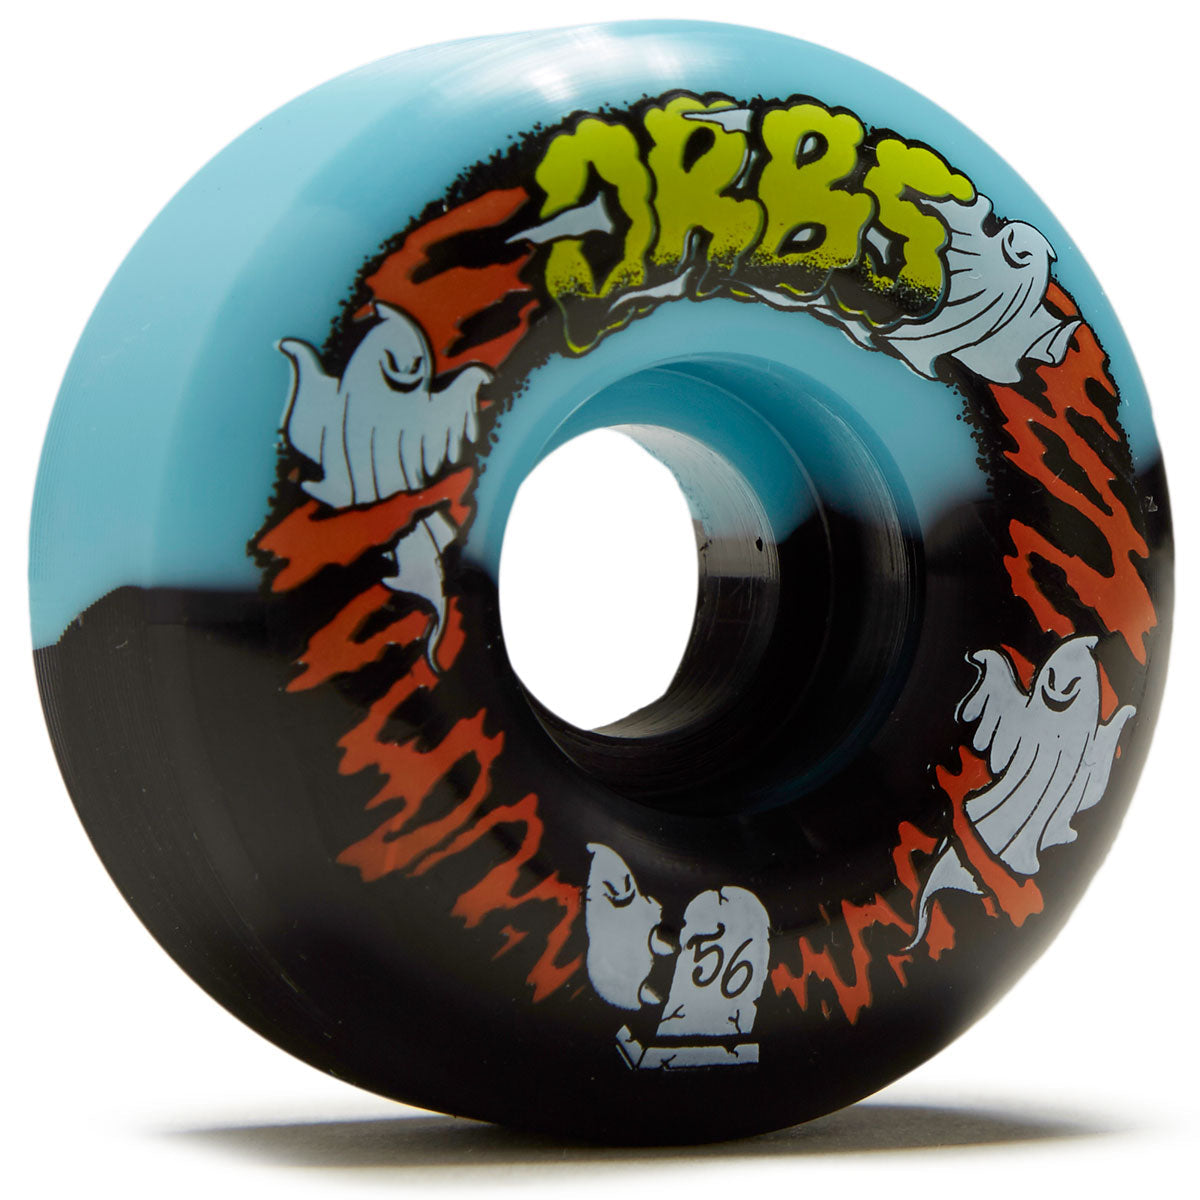 Welcome Orbs Apparitions '23 Round 99A Skateboard Wheels - Black/Blue Split - 56mm image 1